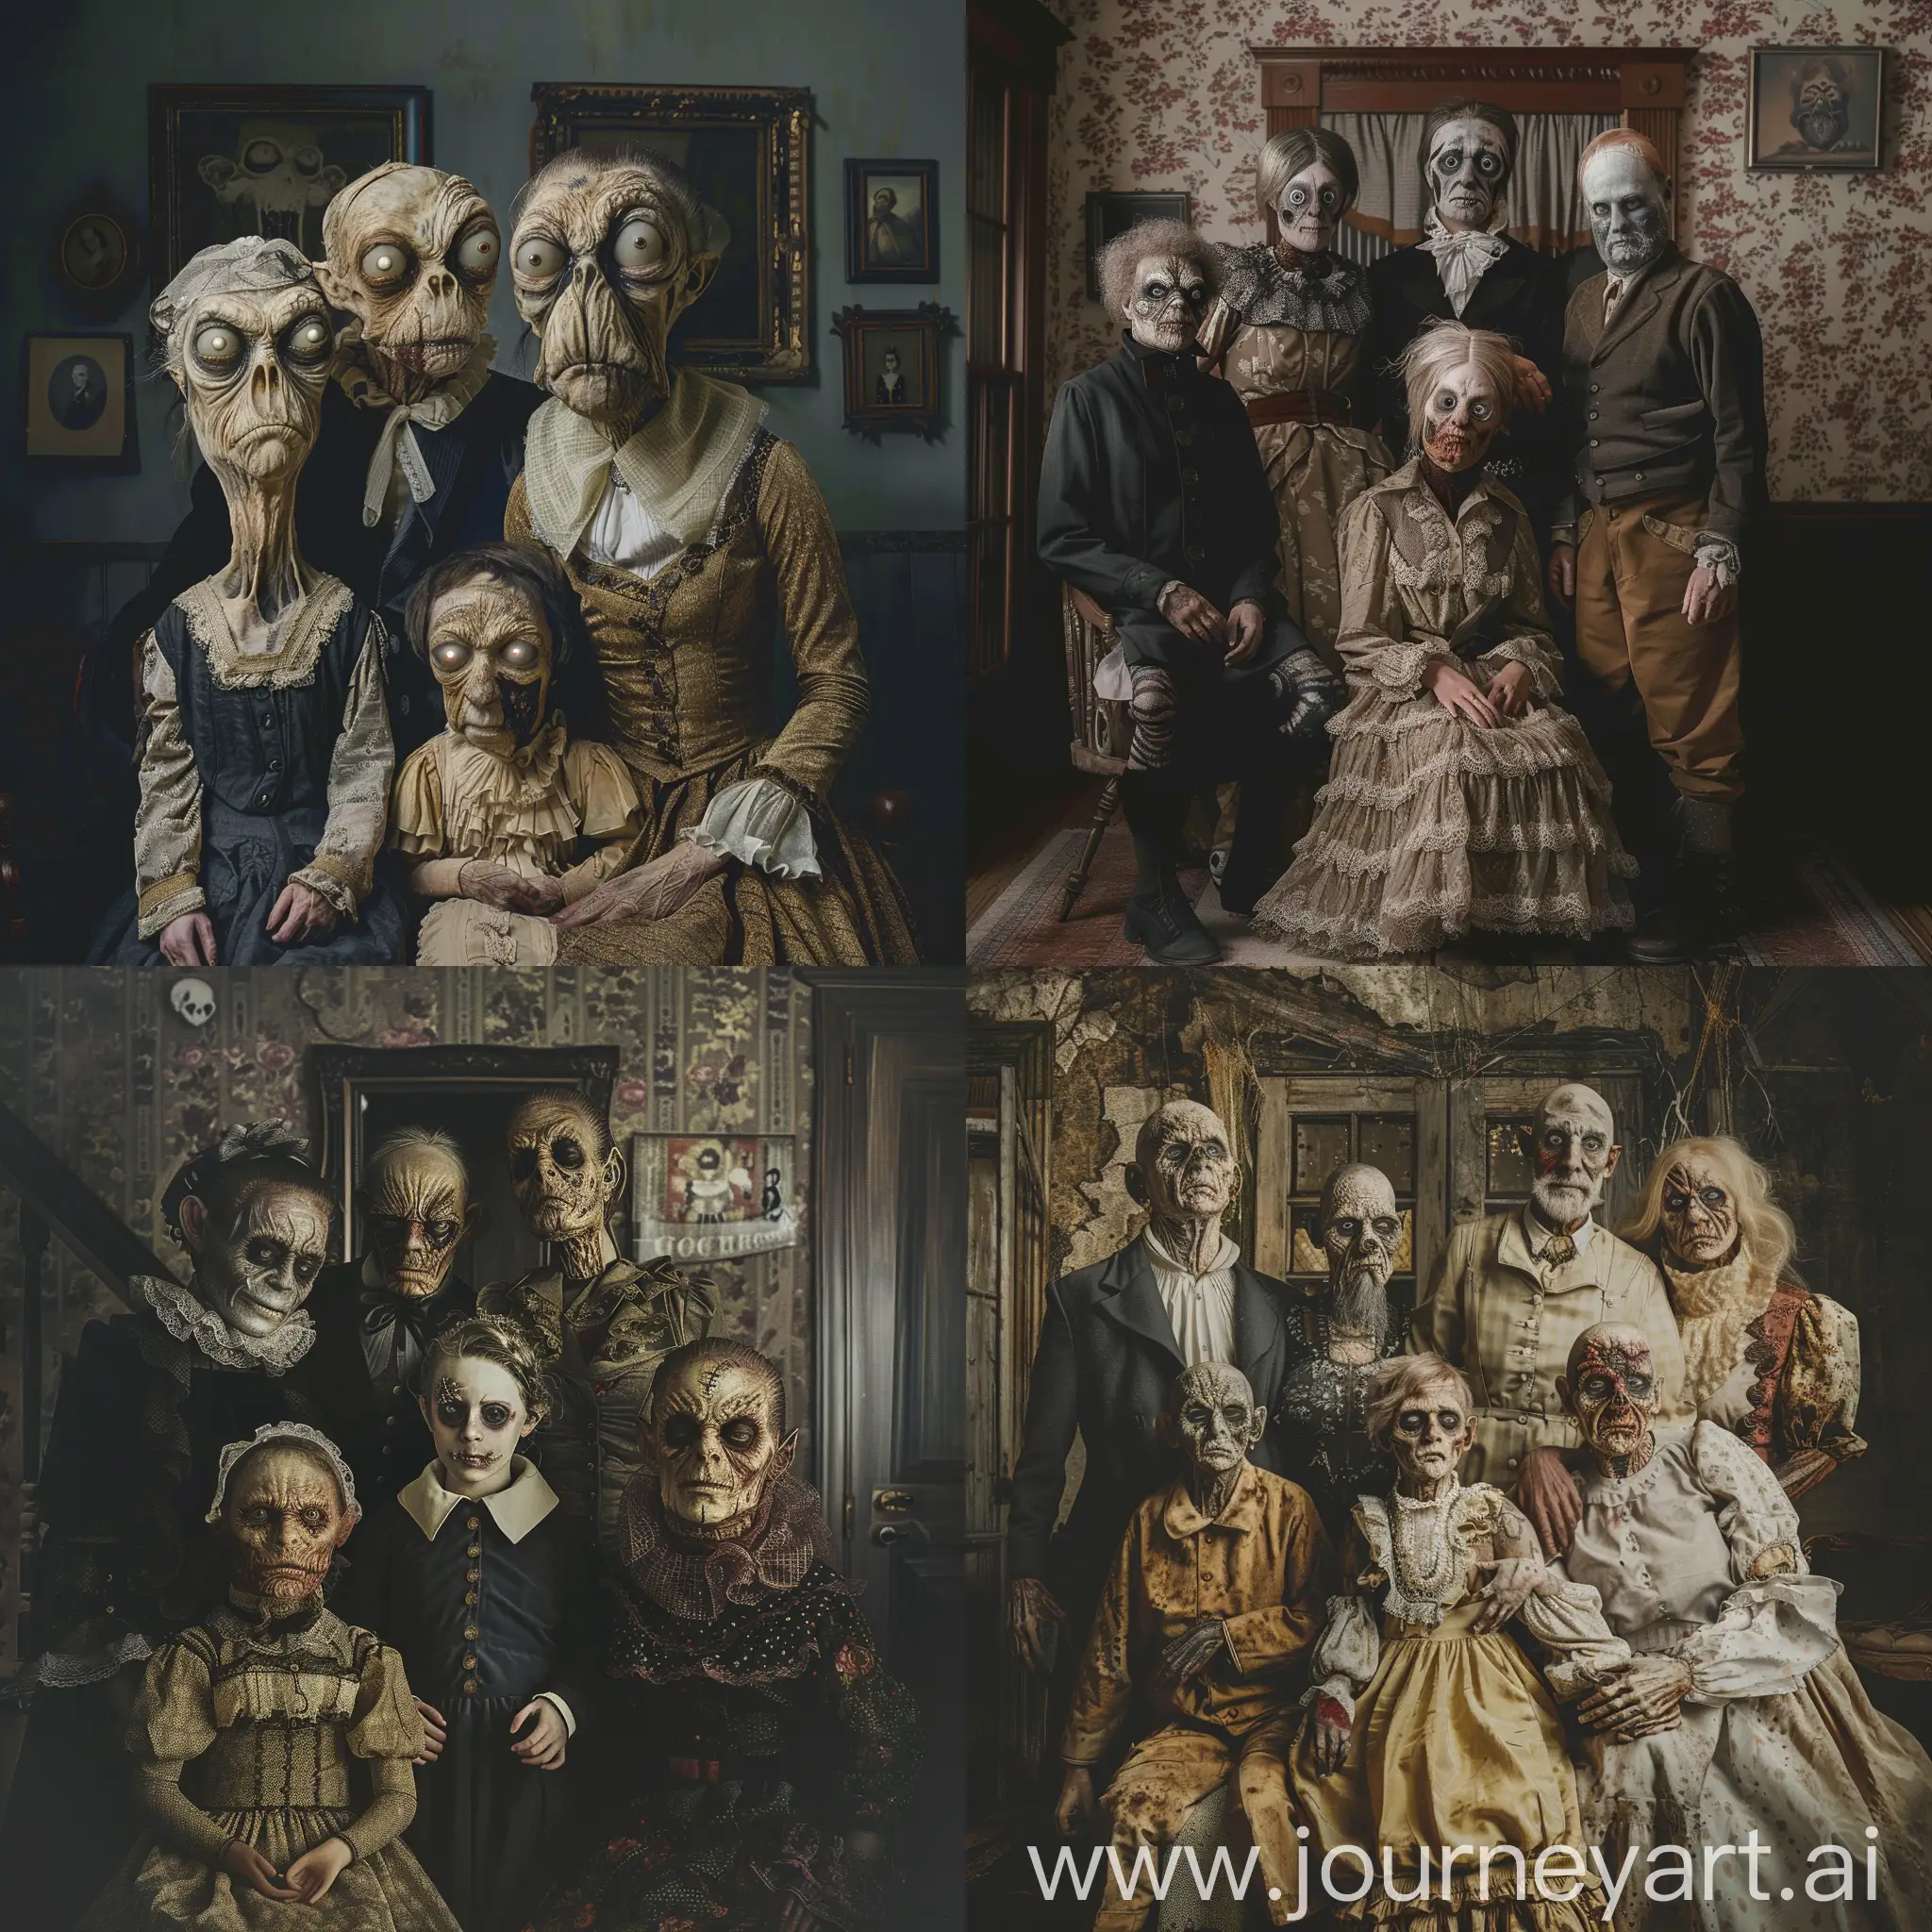 Eerie-1800s-Freak-Family-Portrait-in-Haunted-House-with-VHS-Aesthetics